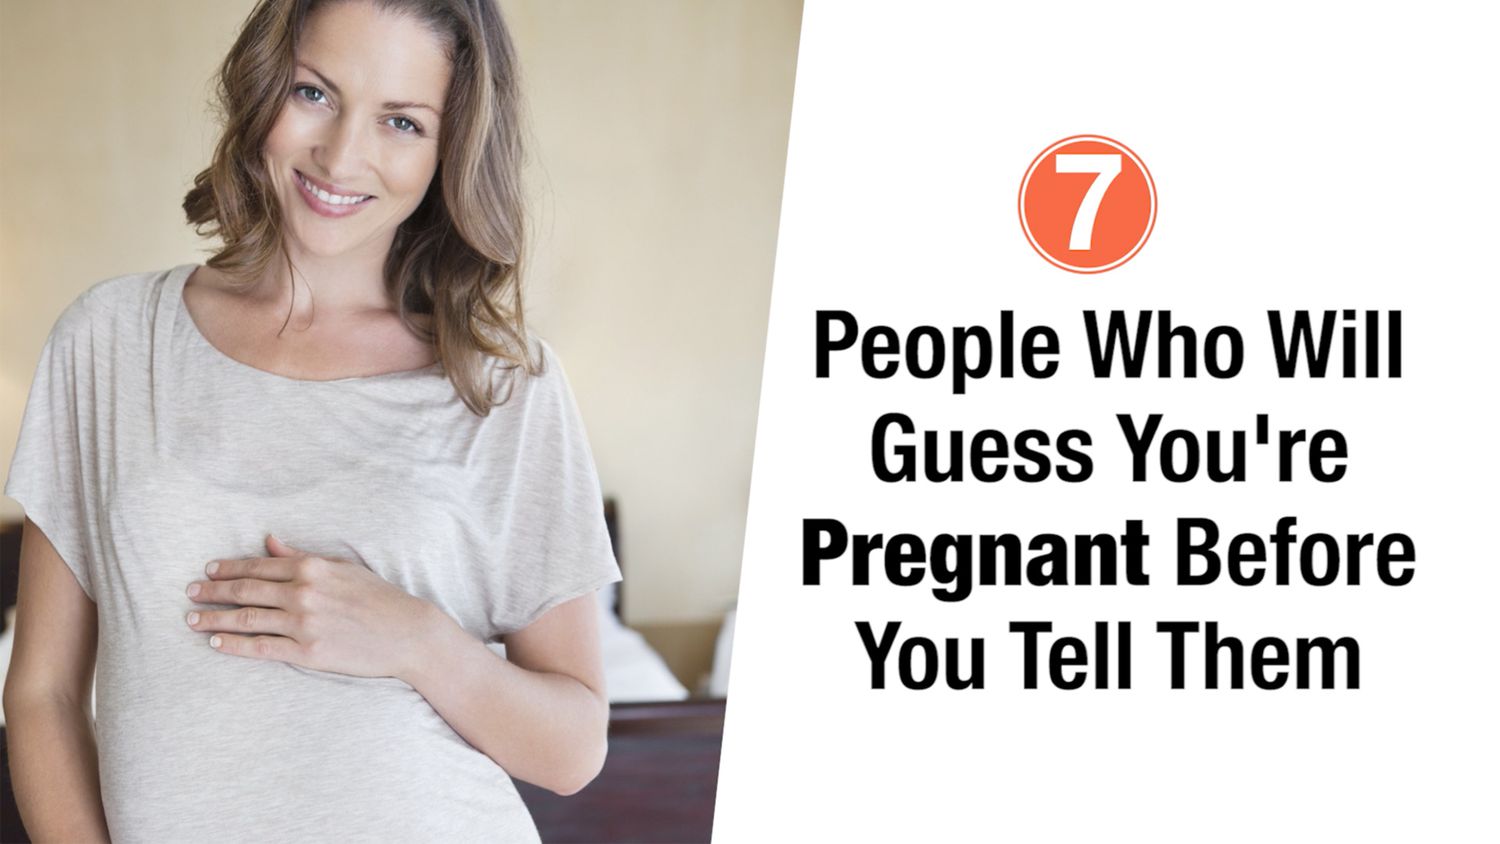 7 People Who Will Guess You're Pregnant Before You Tell Them